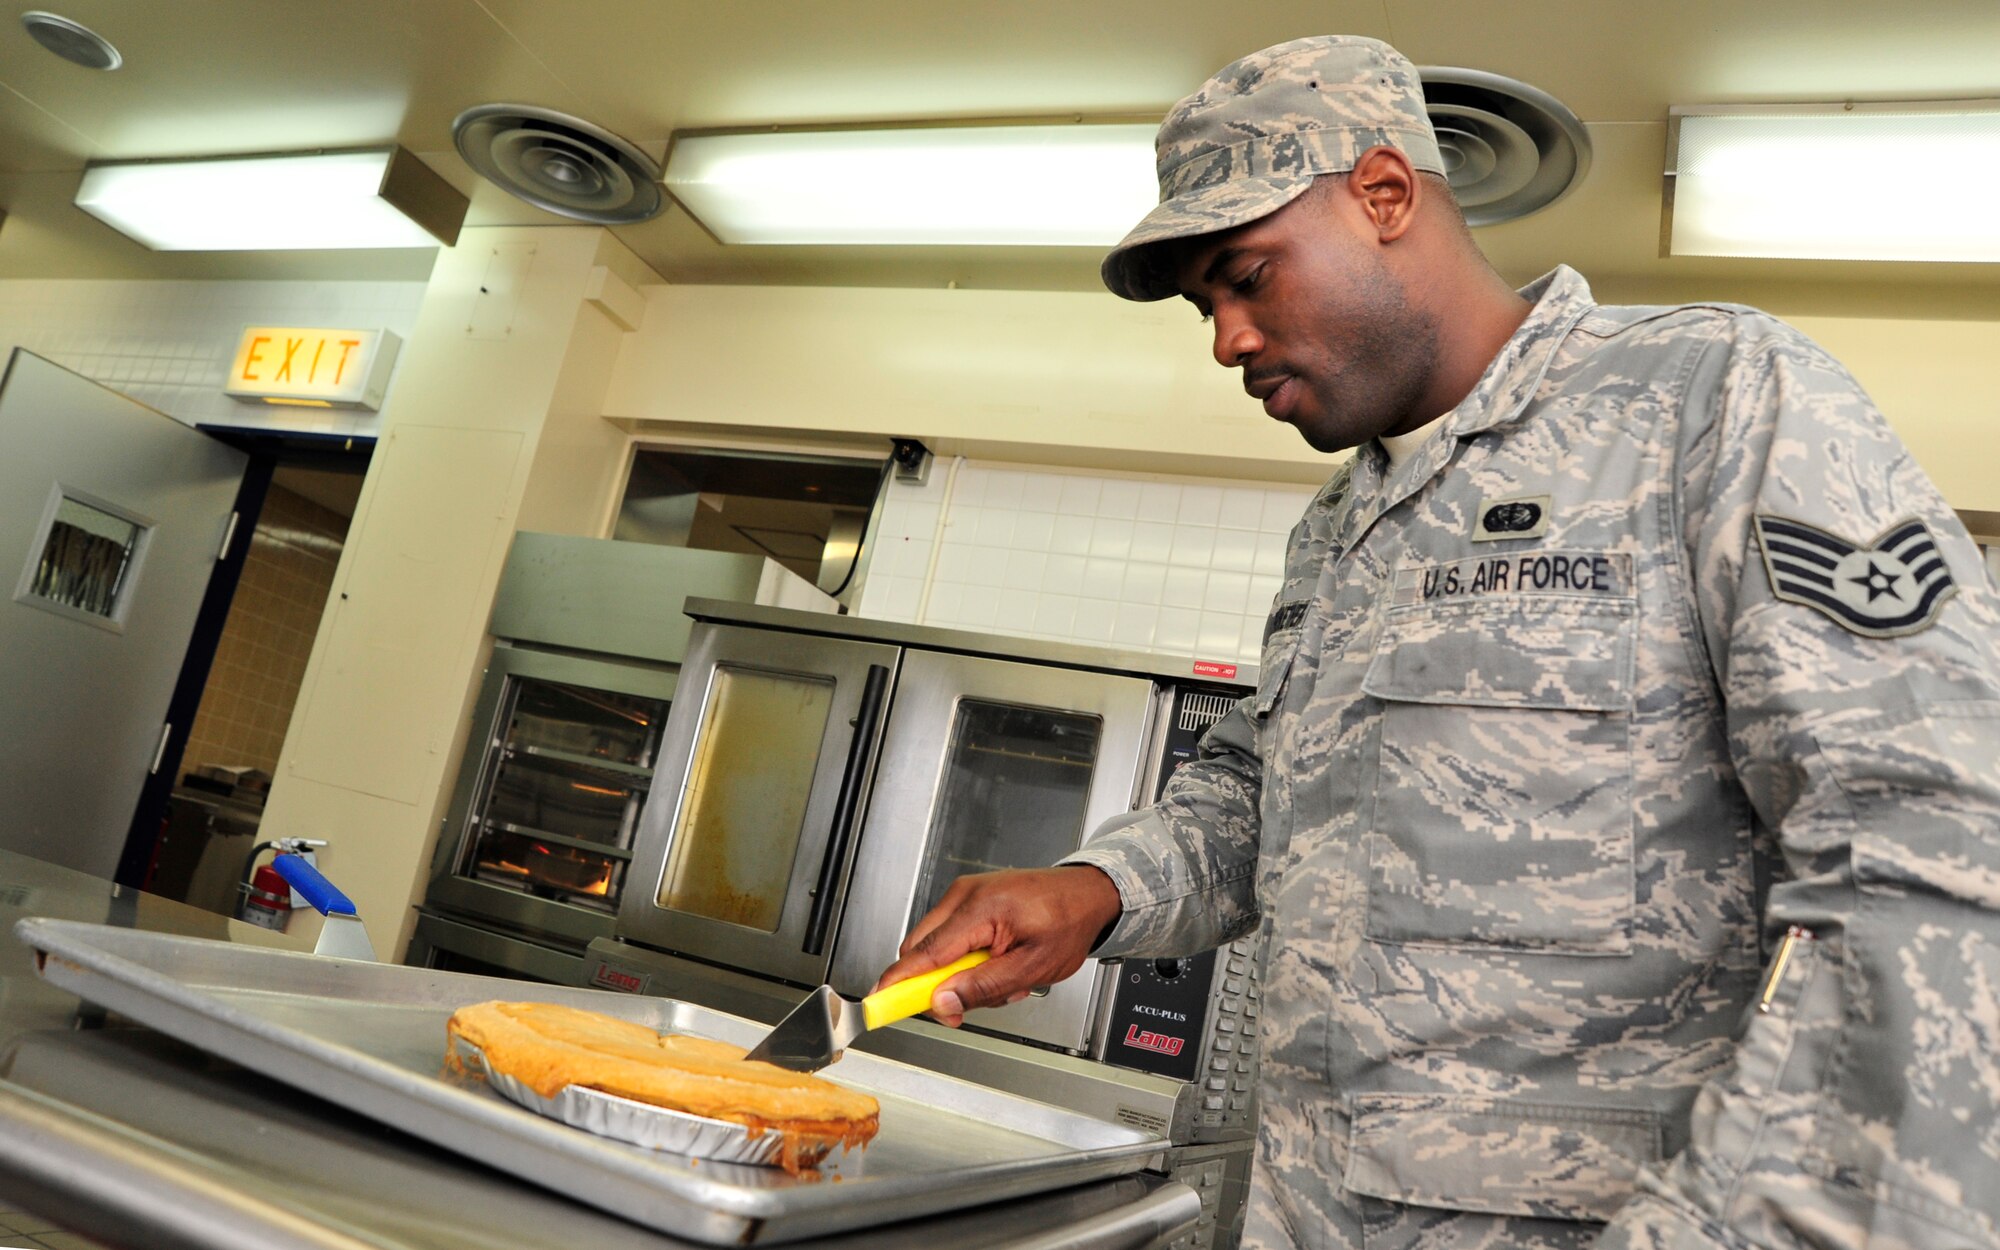 MISAWA AIR BASE, Japan – U.S. Air Force Staff Sgt. Reid Merriwether, 35th Force Support Squadron food service technician, slices an apple pie for hungry exercise participants at the Falcon Feeder dining facility during an operational readiness exercise here Nov. 6. The 35th Fighter Wing is currently going through an ORE in preparation for an operational readiness inspection in December. (U.S. Air Force photo/Staff Sgt. Nathan Lipscomb)